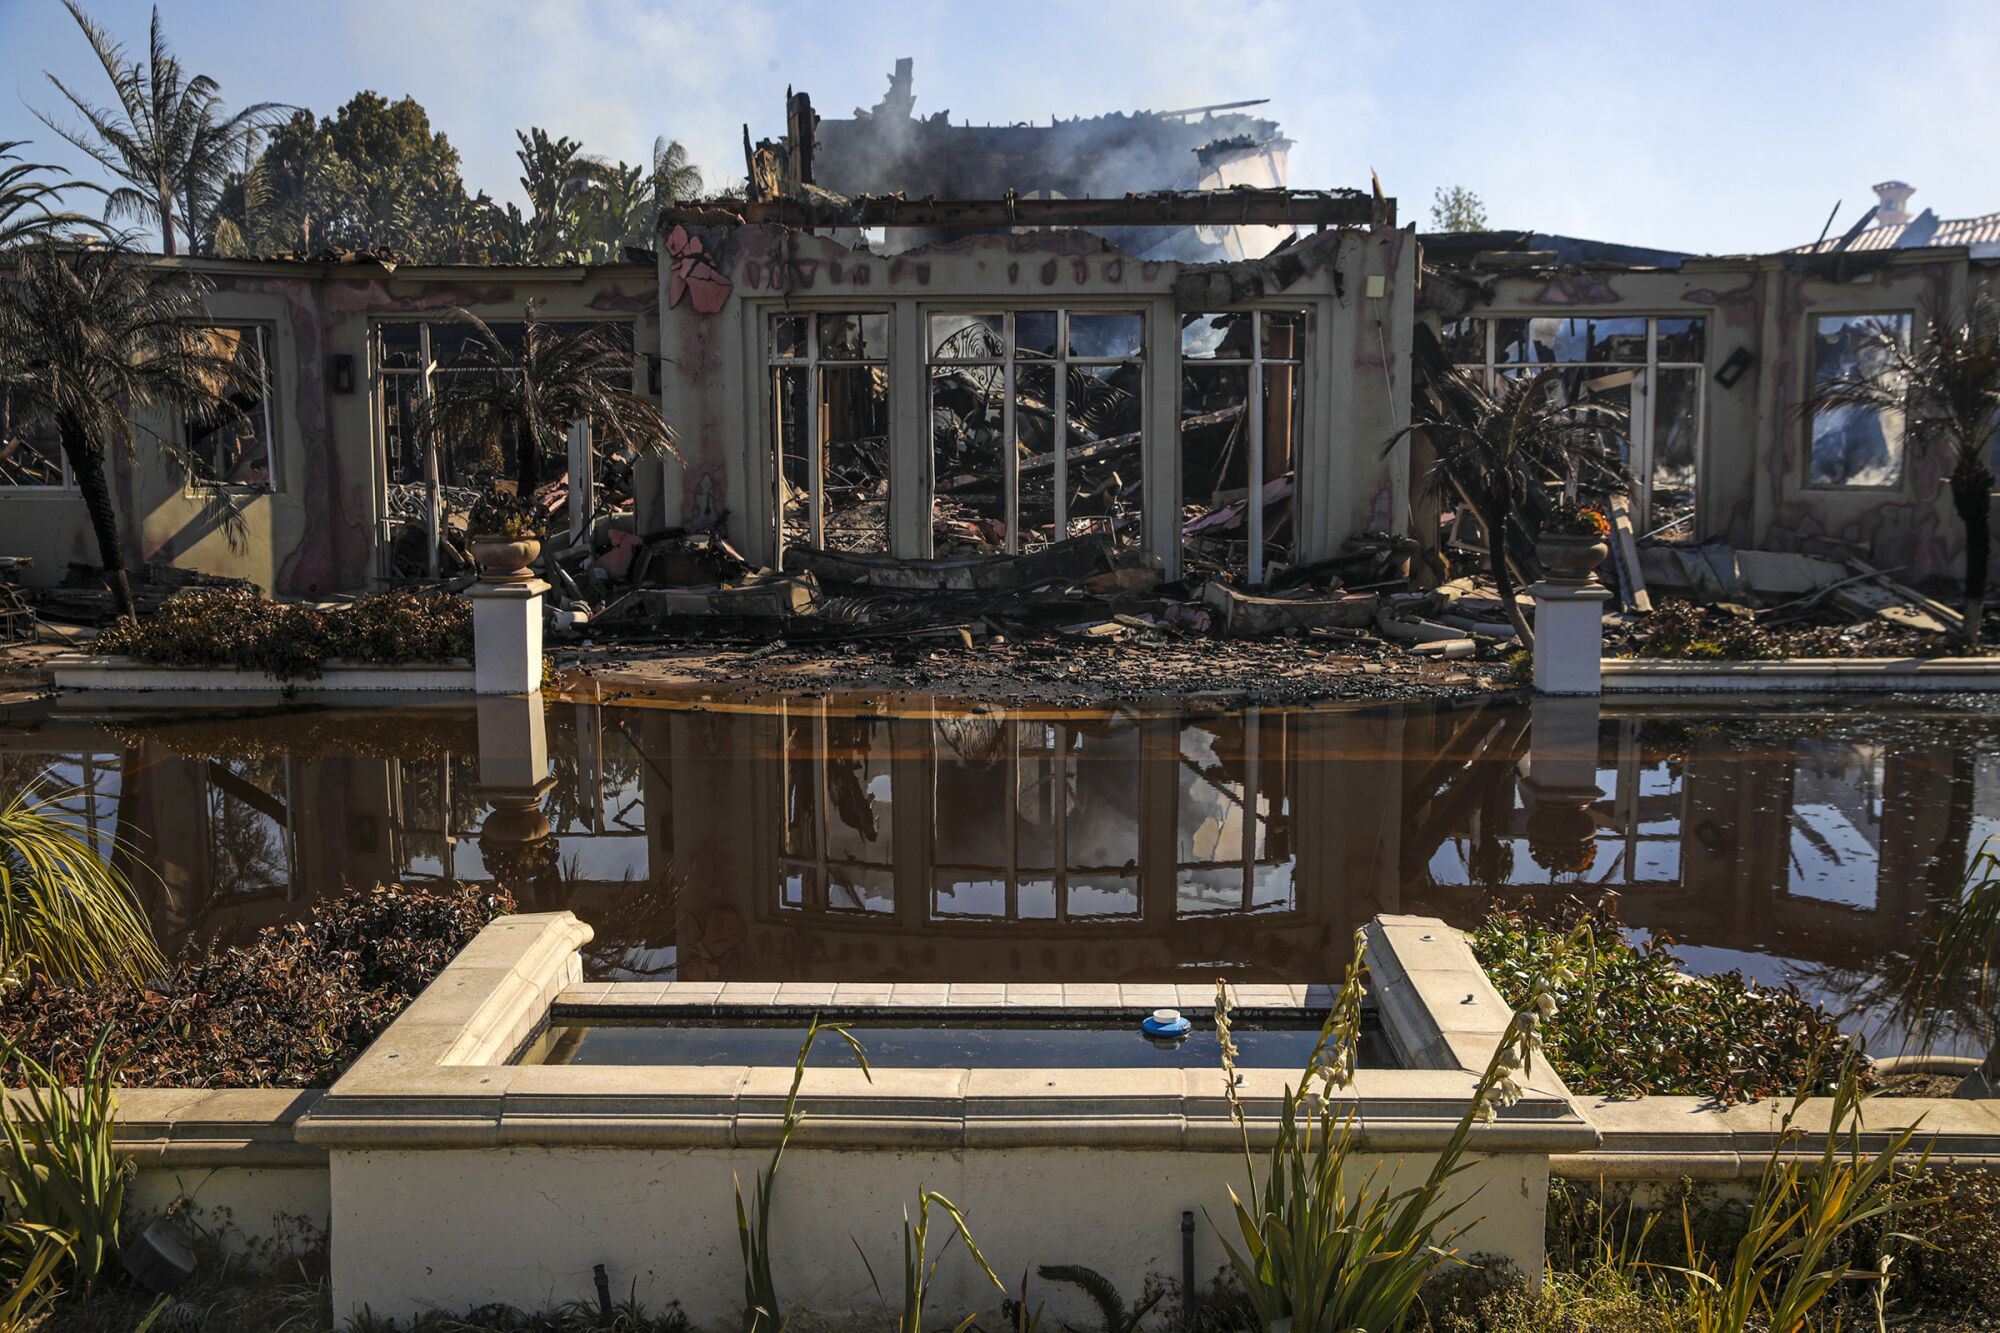 A large home continues to smolder from the Coastal fire on Vista Court in Laguna Niguel.